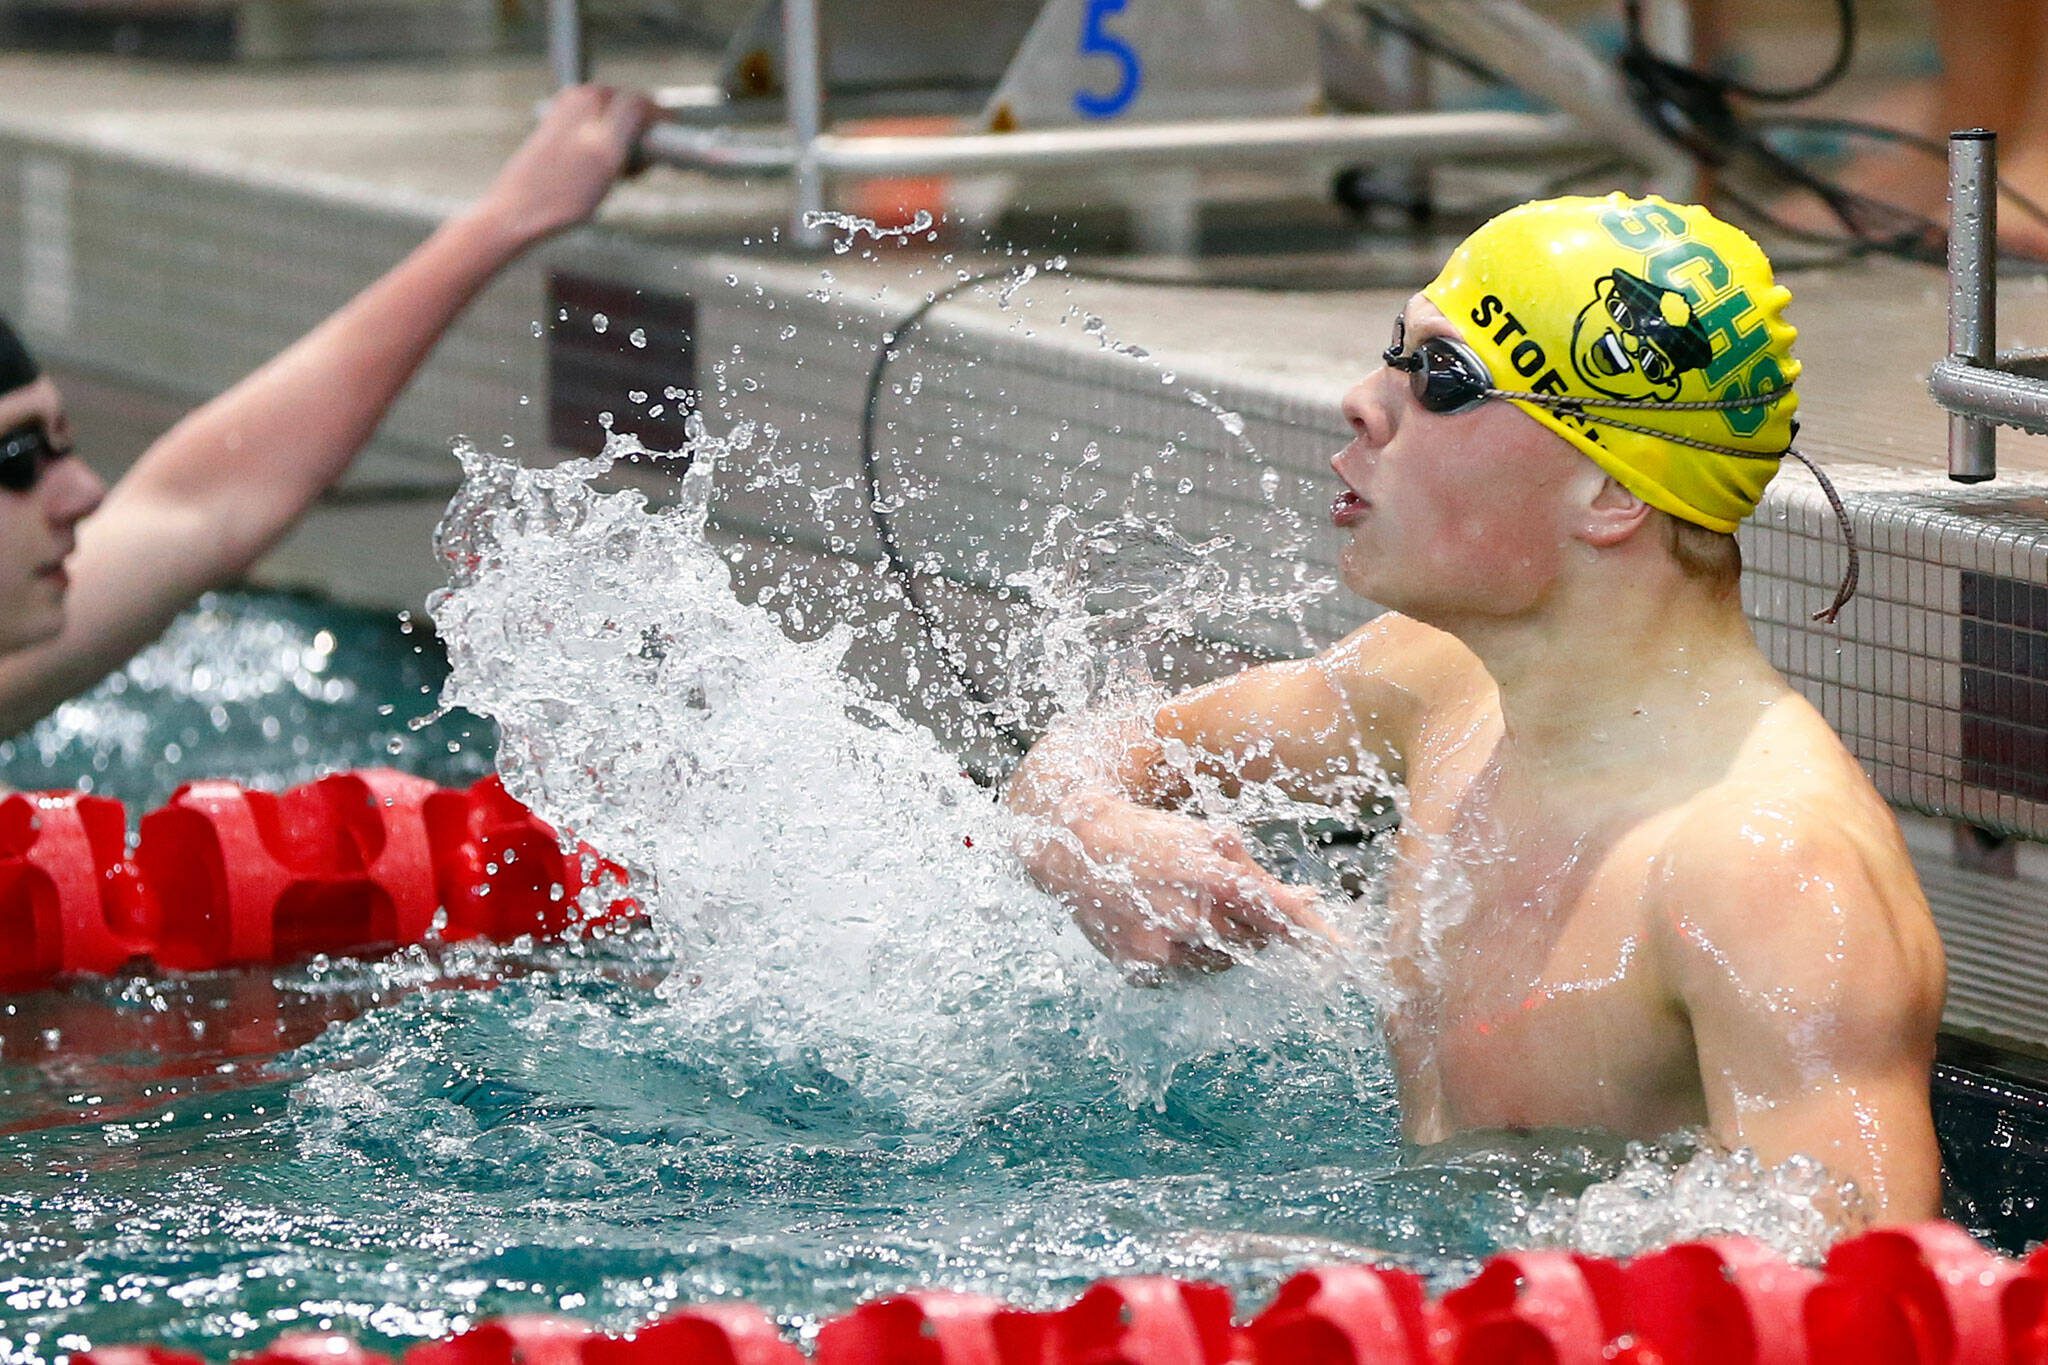 Shorecrest junior Colton Stoecker celebrates a come-from-behind win in the 200-yard freestyle during the Class 3A District 1 swim and dive meet Saturday at the Snohomish Aquatic Center in Snohomish. (Ryan Berry / The Herald)